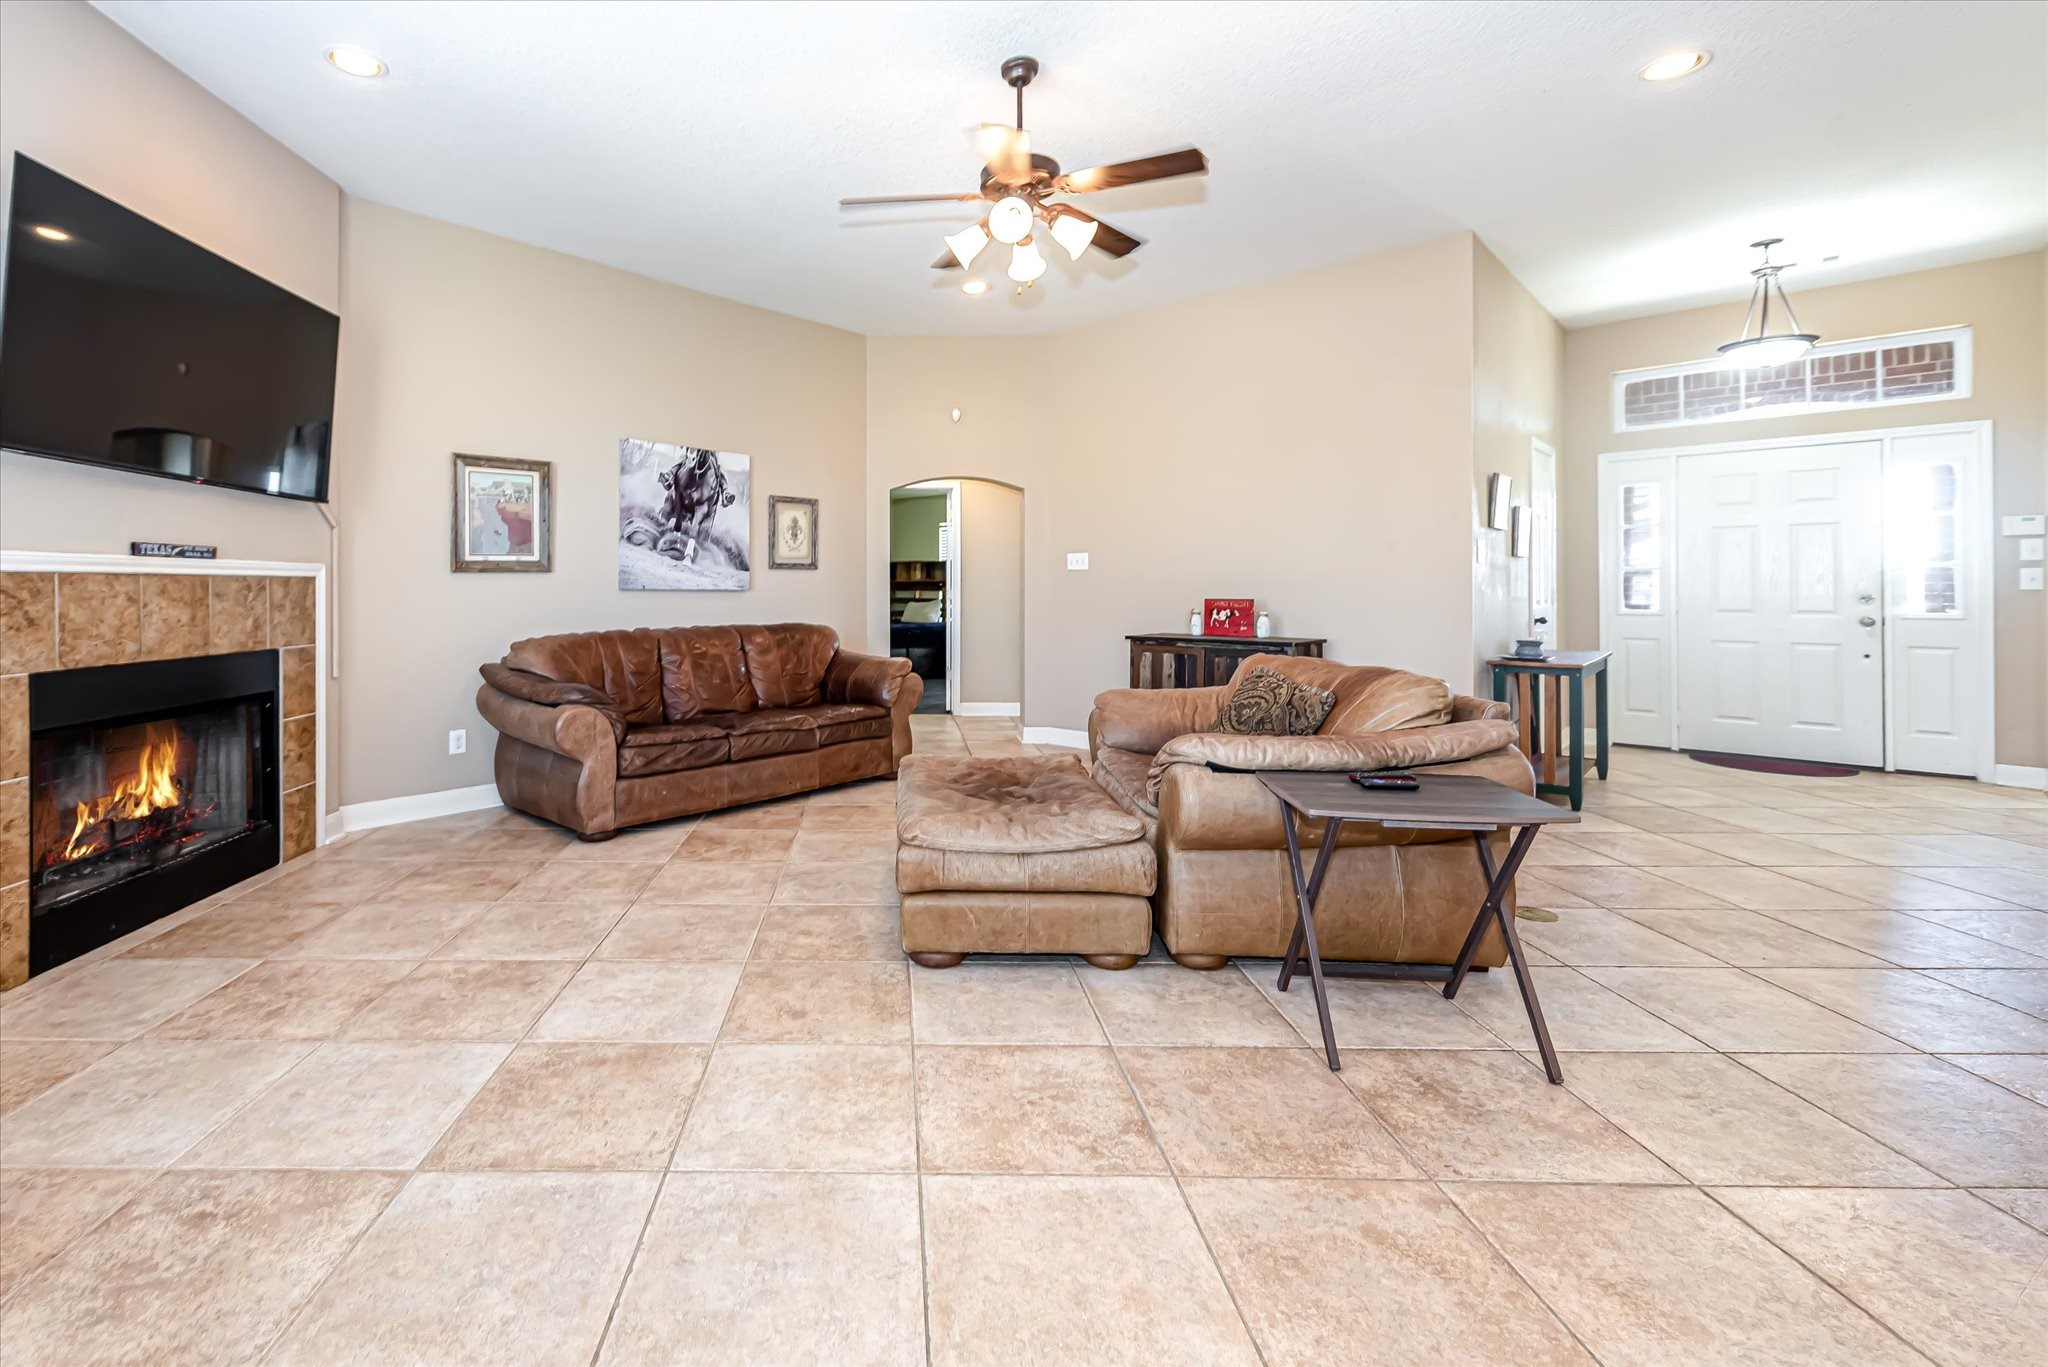 Living area has tile floor and ceiling fan with lights.